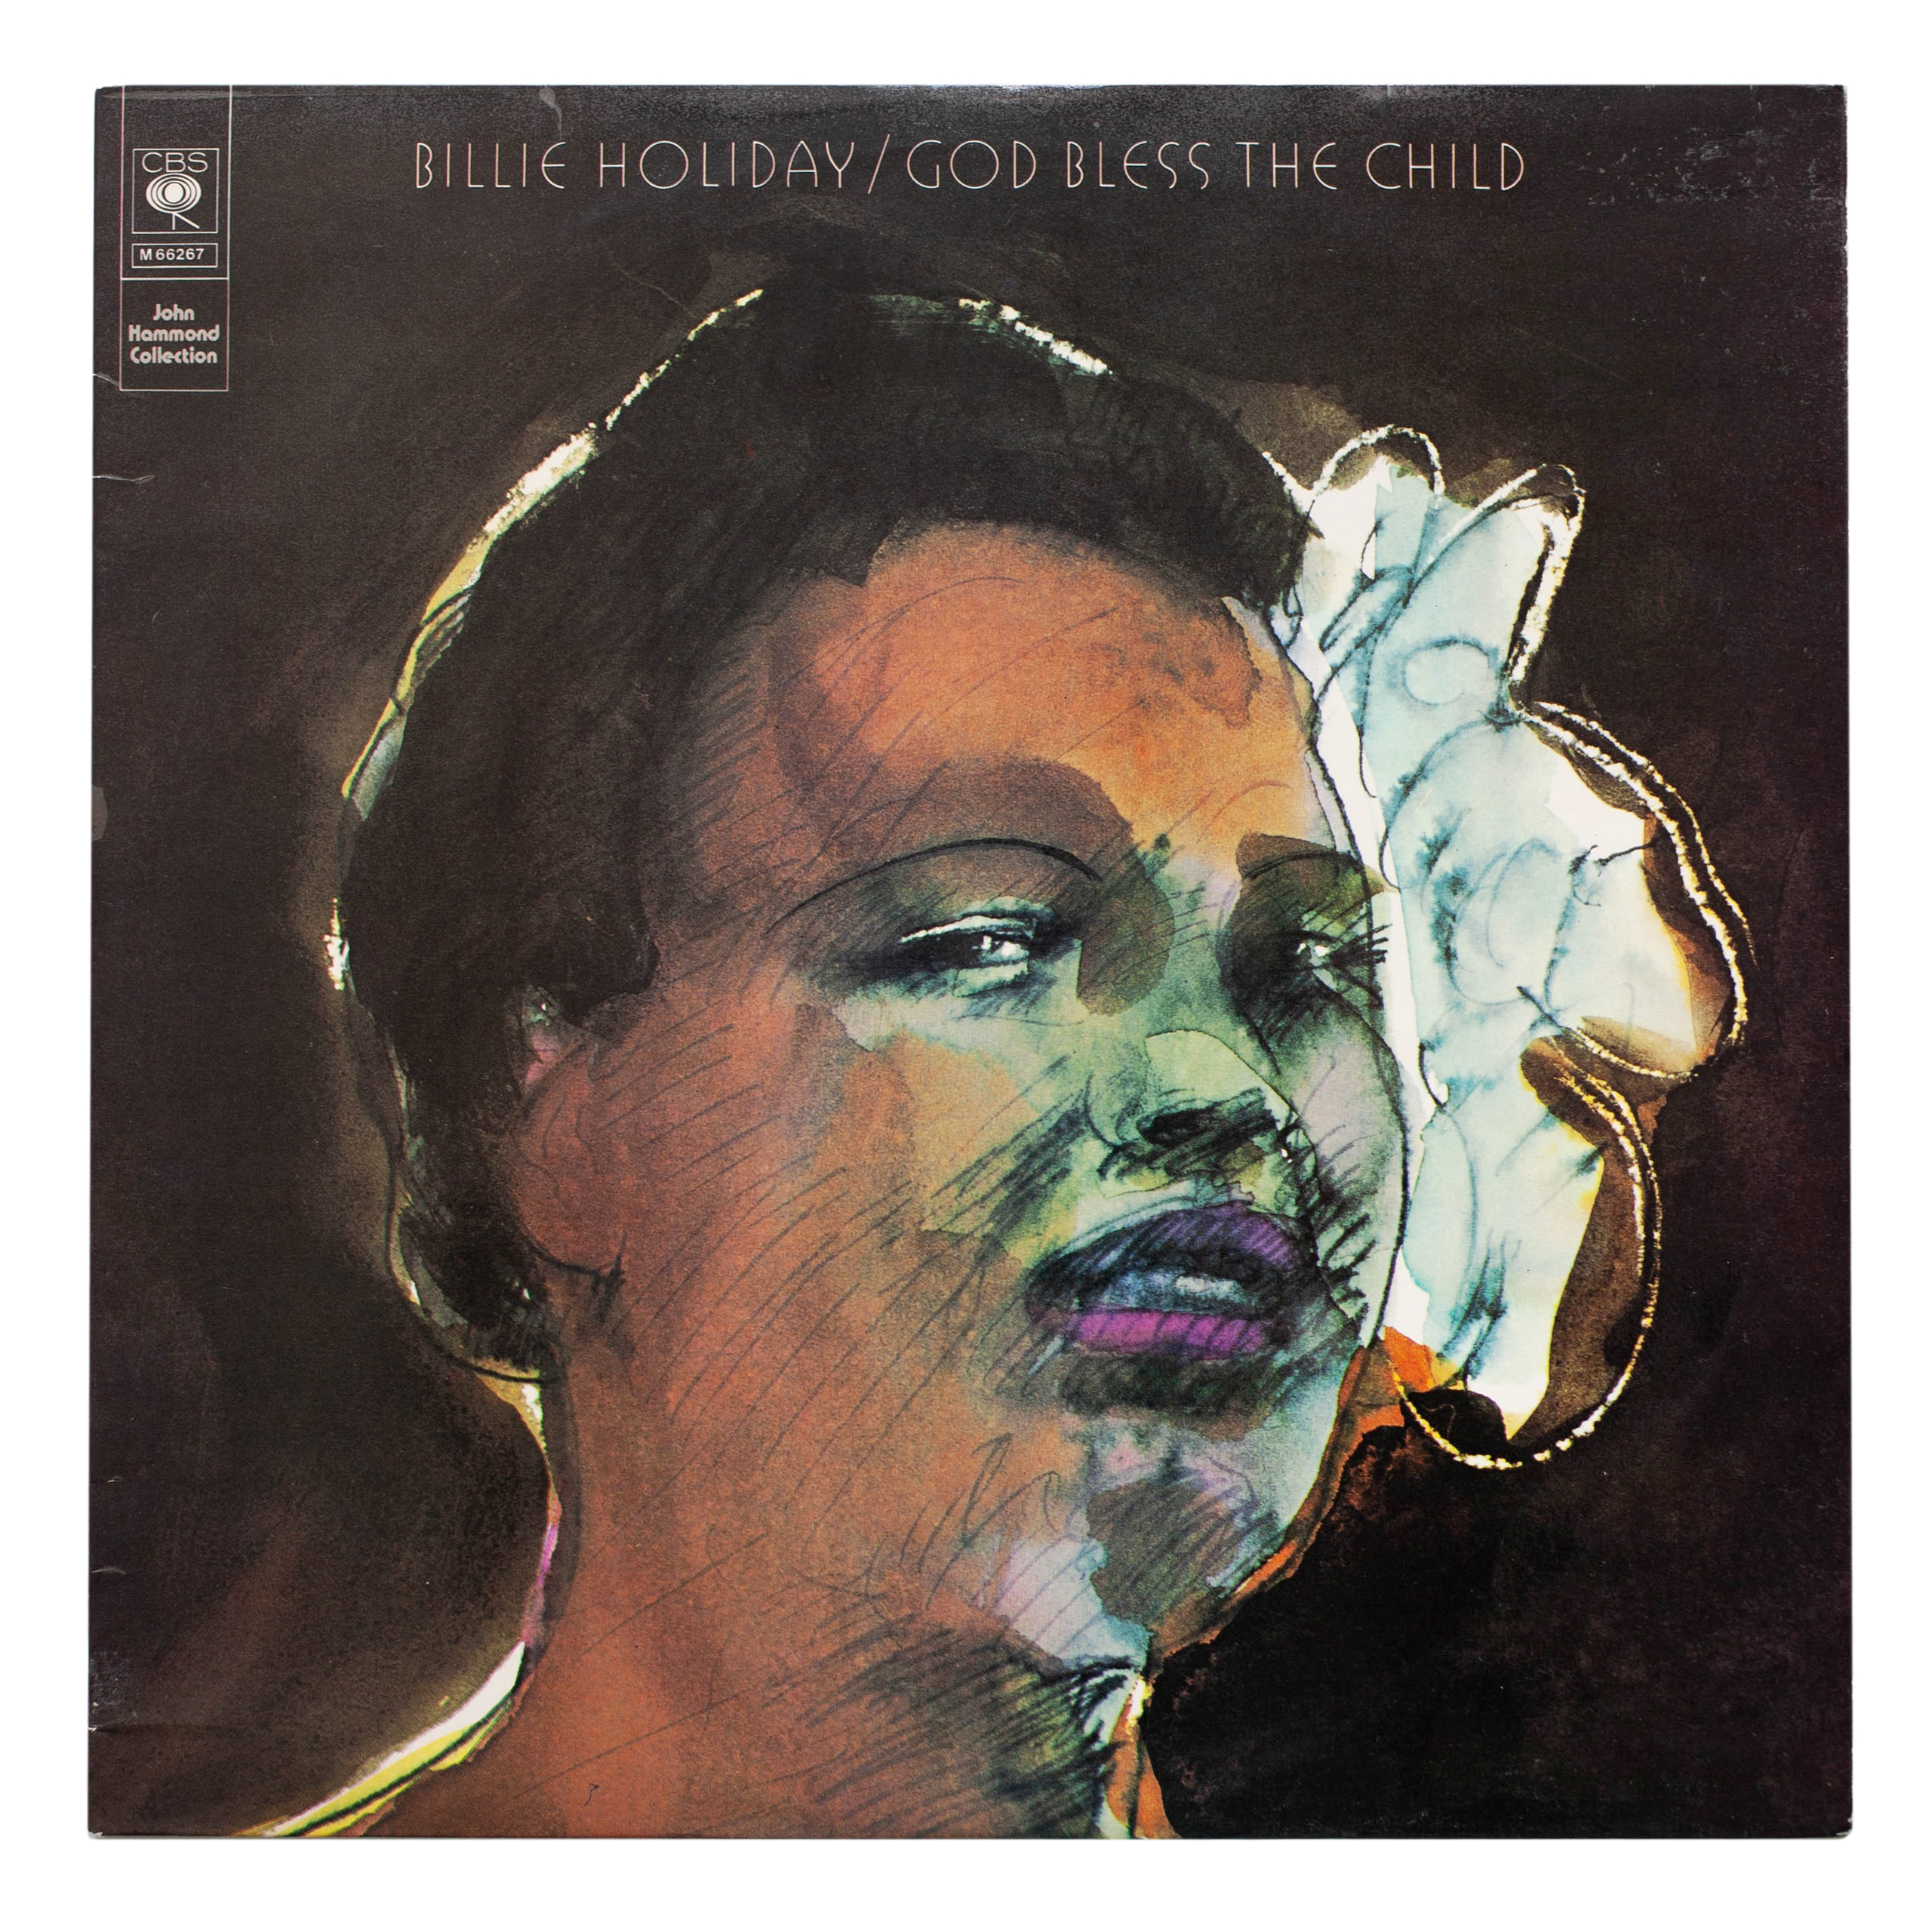 Винил Billie Holiday - God Bless The Child, размер One Size